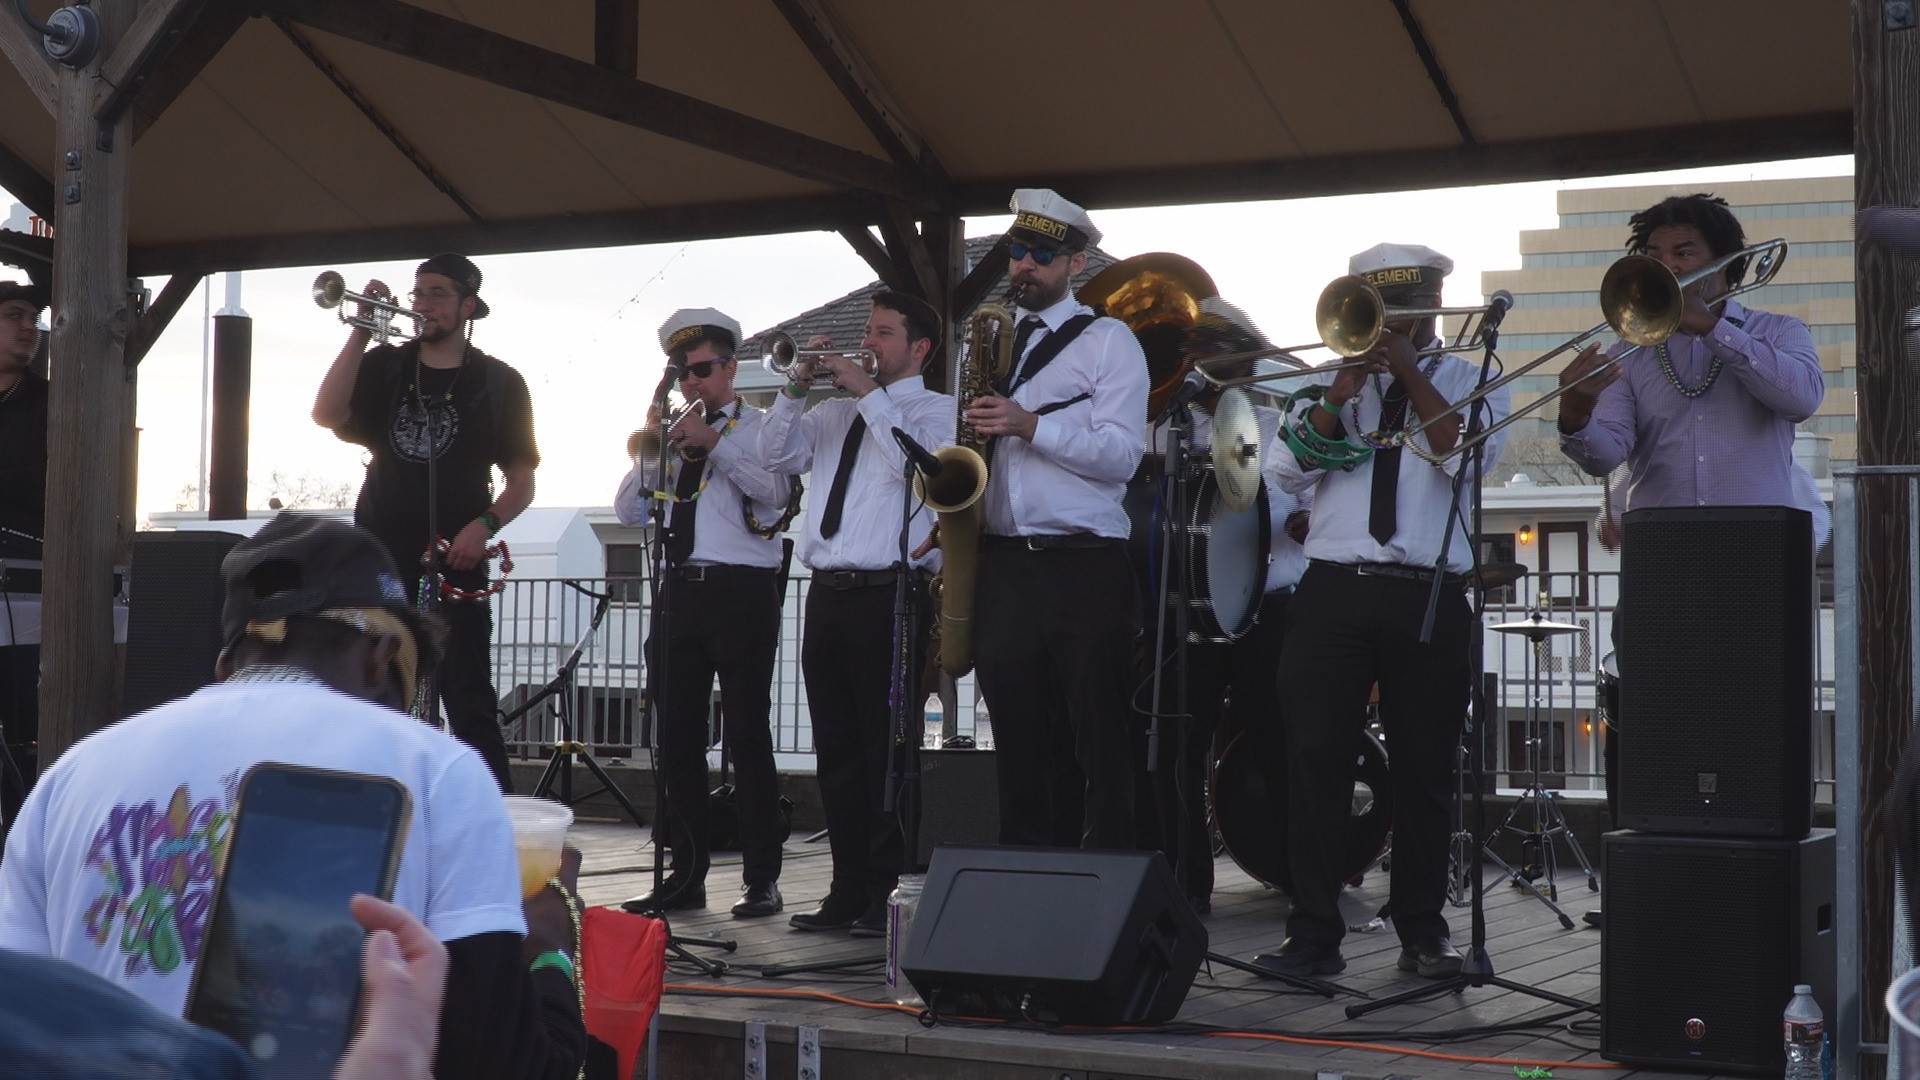 The Second Line Sunday Festival featured live music, food and arts vendors.